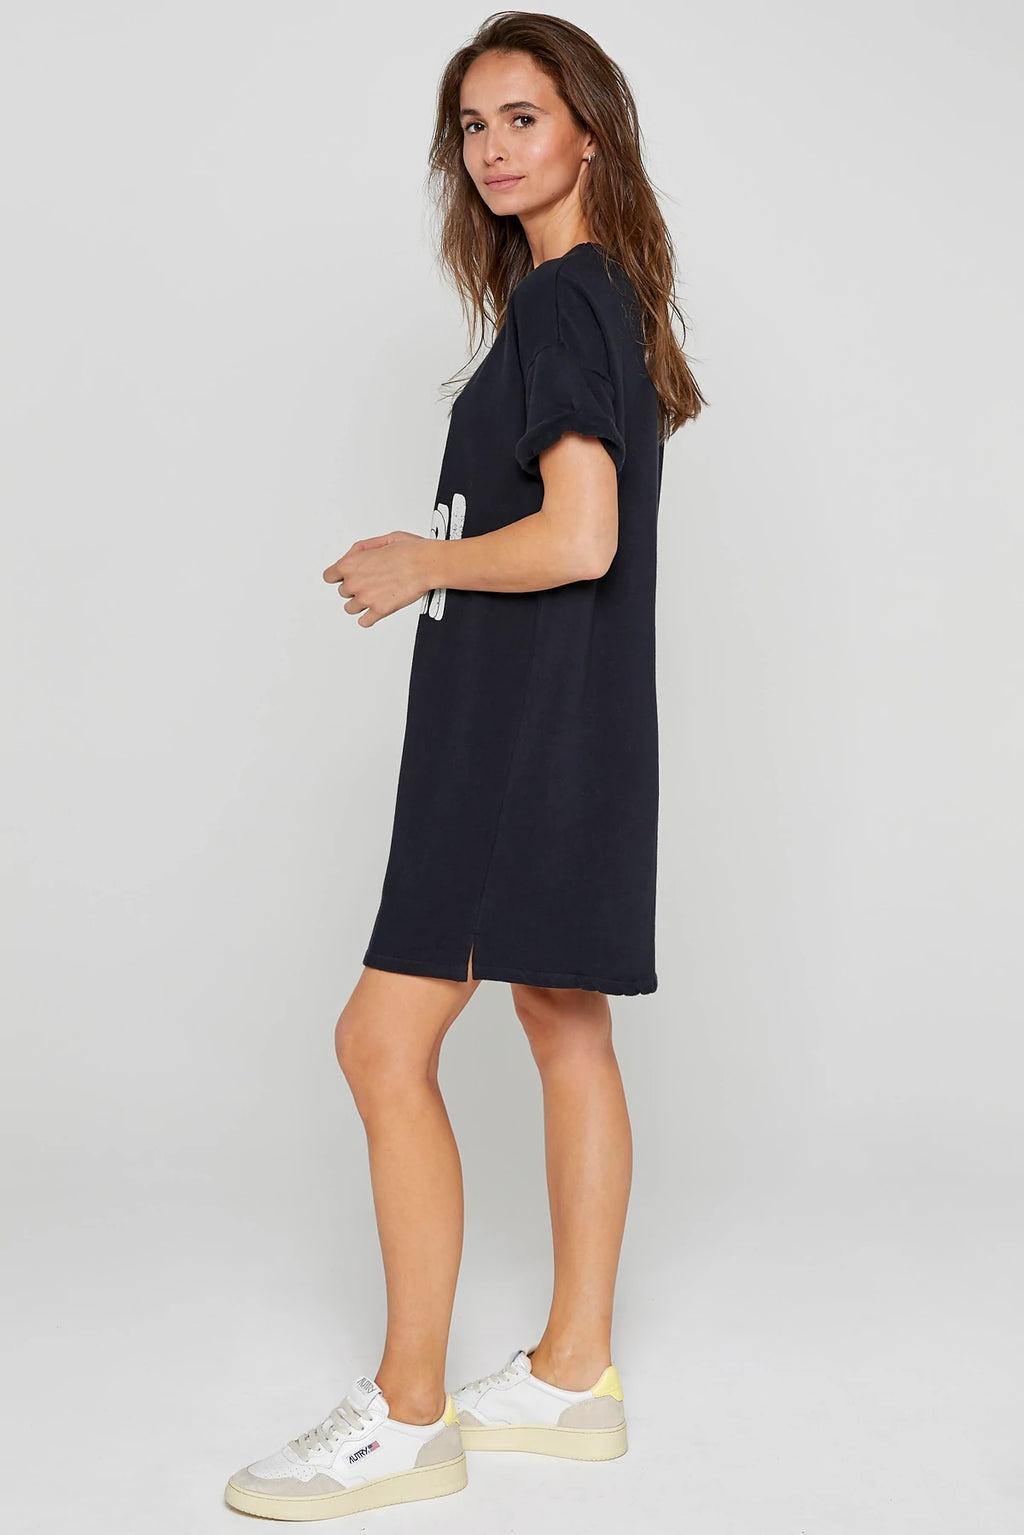 Five Jeans SWE2210 Woodstock Jumper Dress Navy - Sub Couture